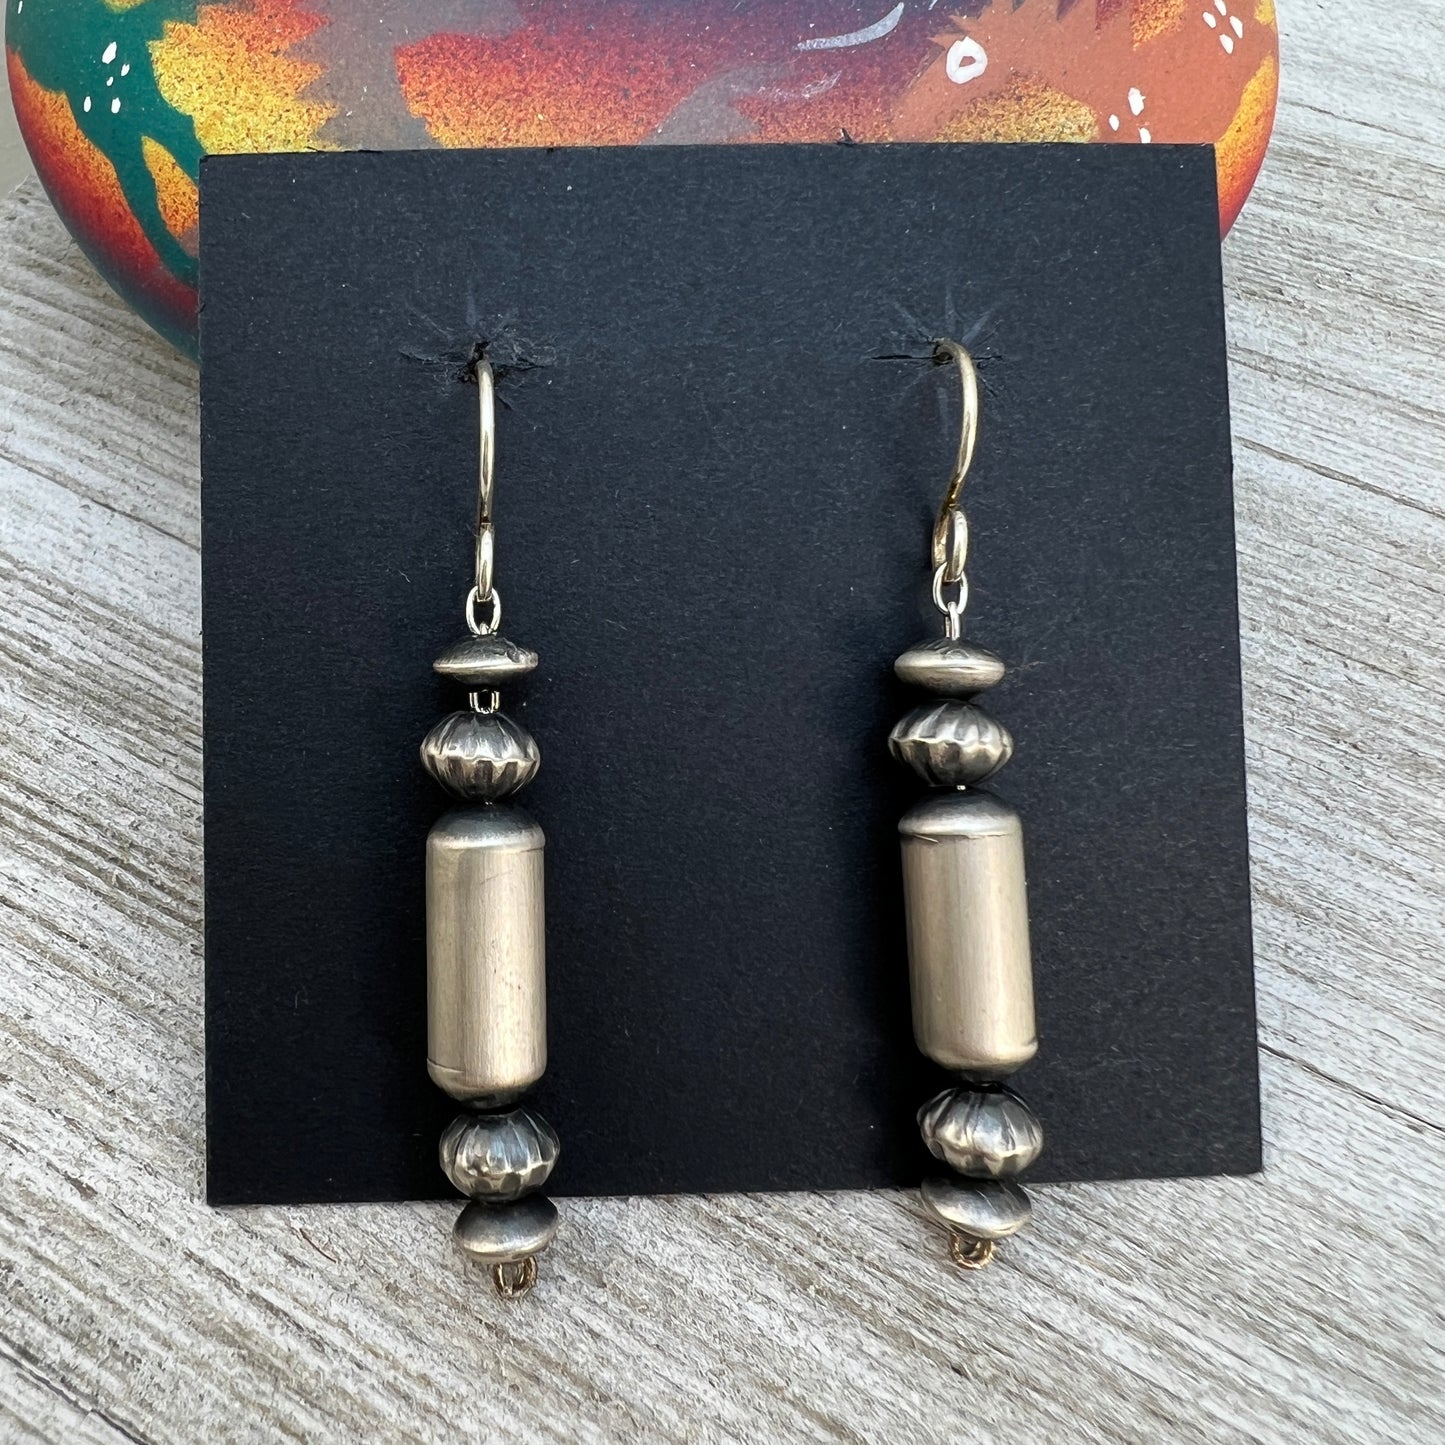 Authentic, Navajo Handmade sterling silver Bead Earrings, Navajo Pearls, By TONISHA HALEY, signed, #2, made in USA